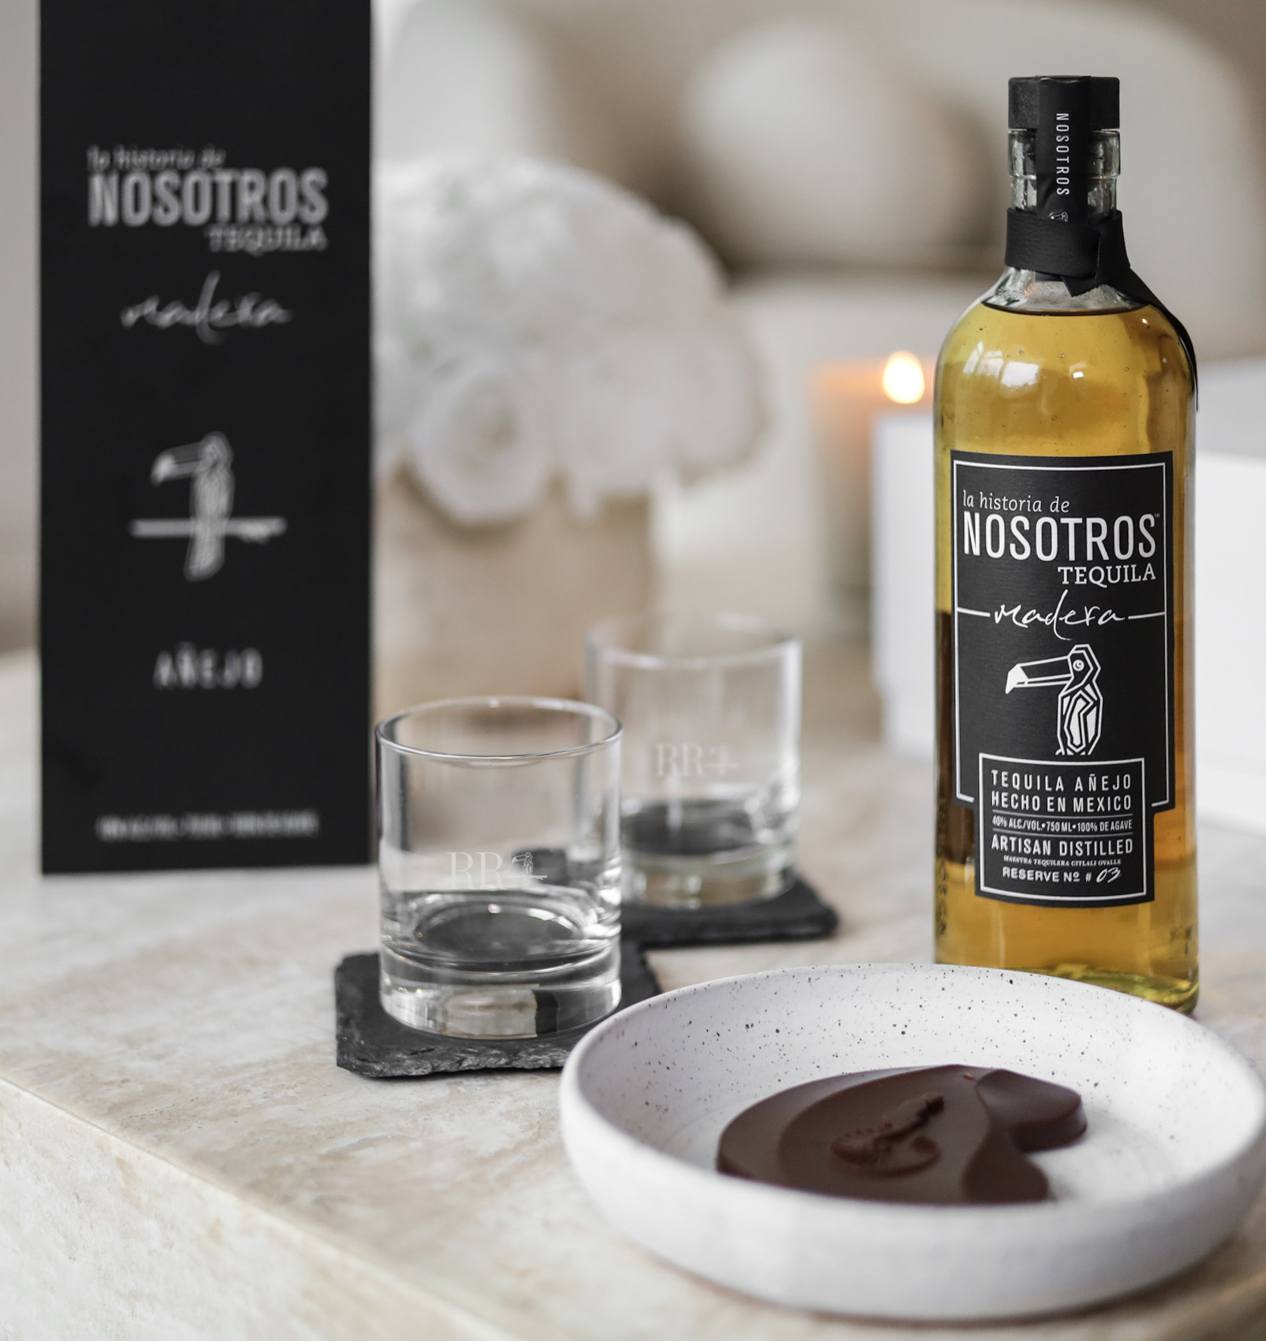 Robb Report X Nosotros Tequila - Everything You Need for a Nightcap